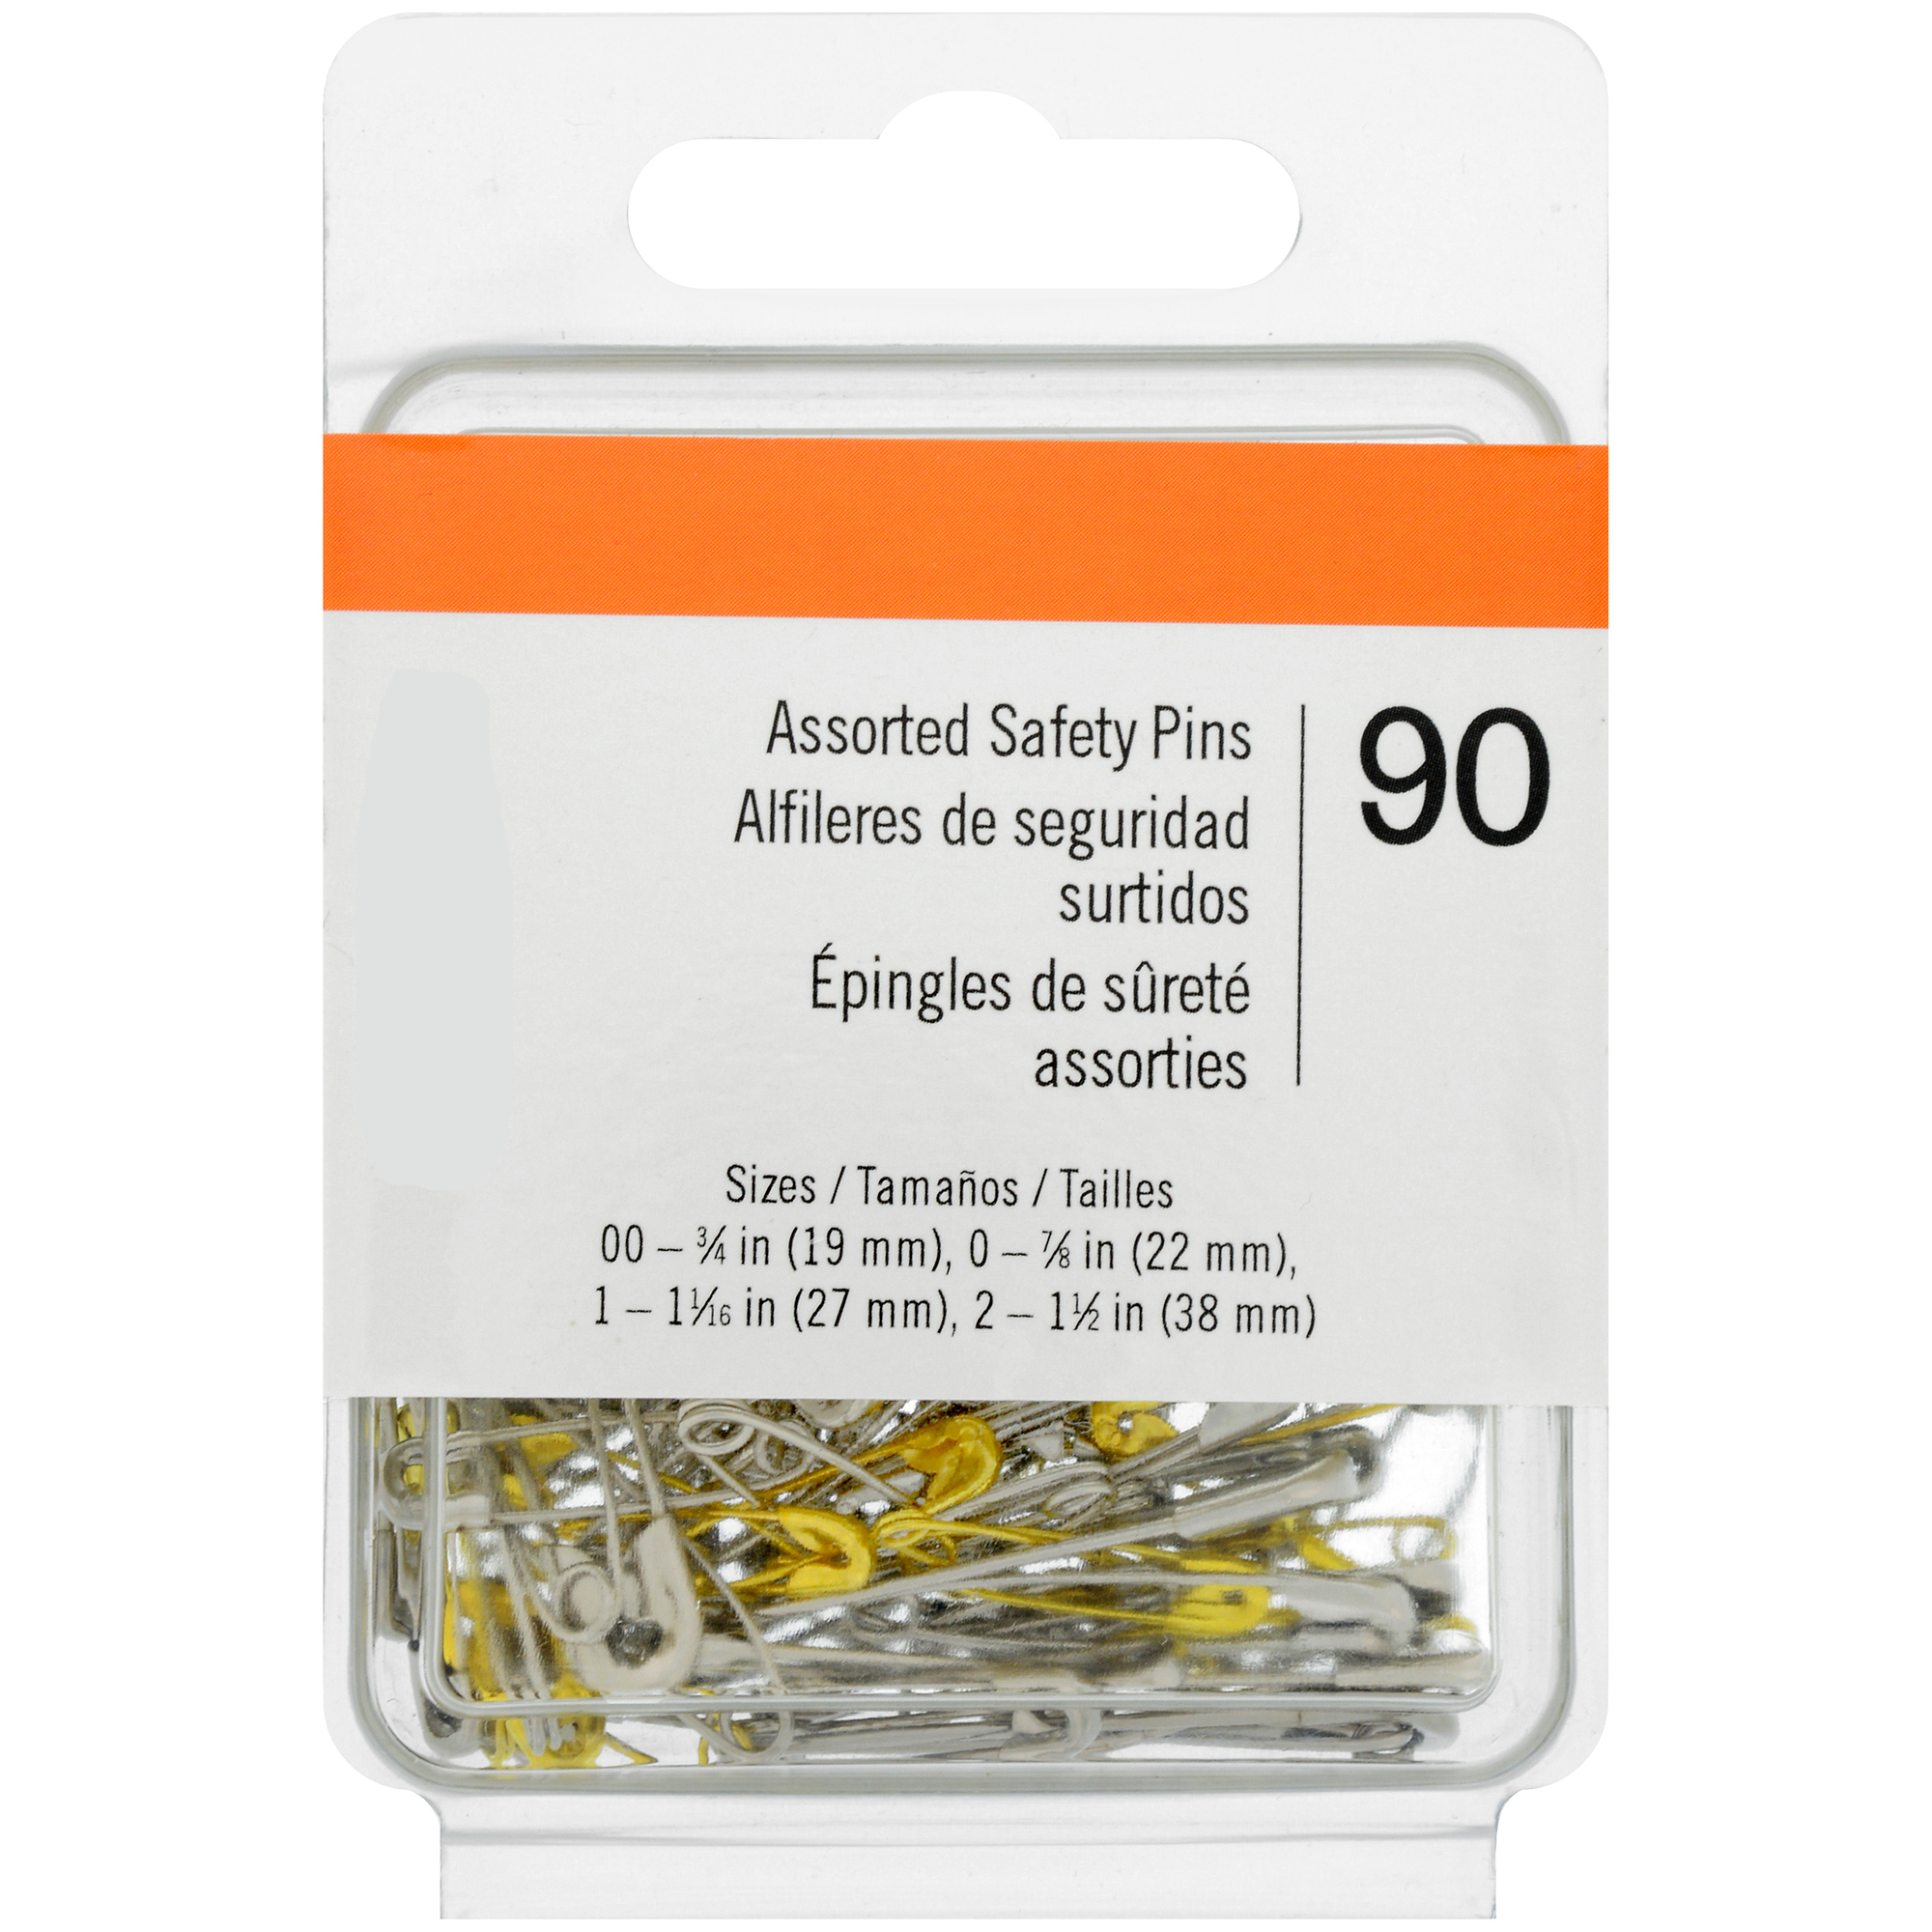 Assorted Safety Pins